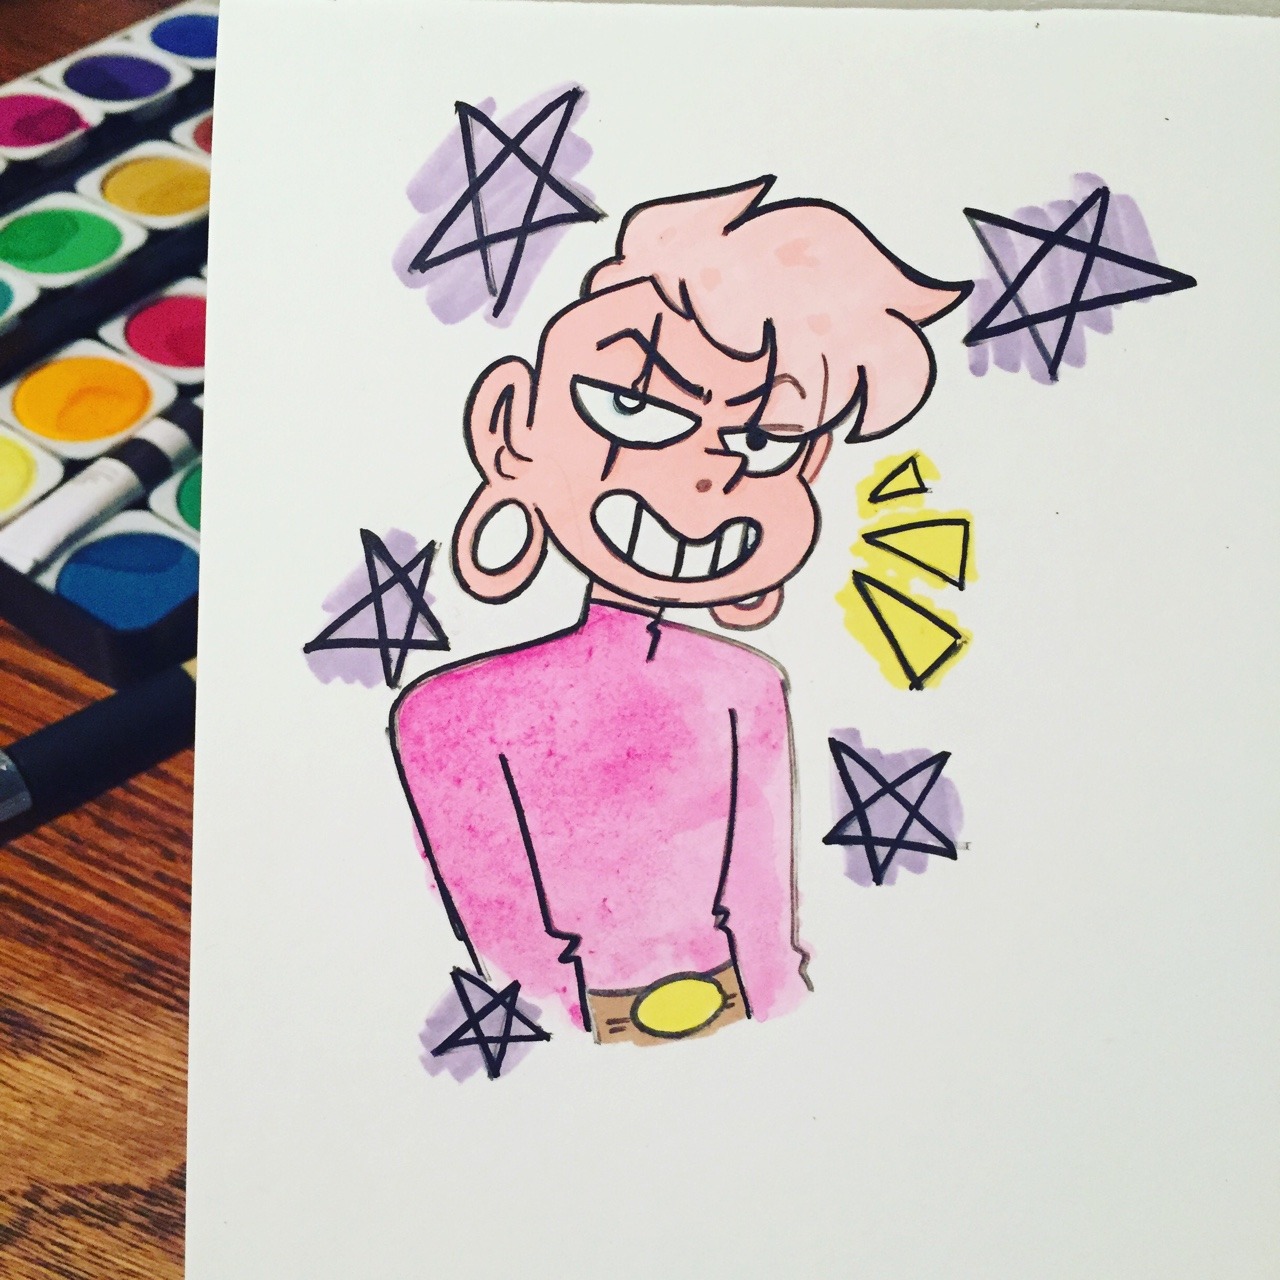 ✨ Lars of the Stars ✨ Illustrated with Winsor Newton Promarkers, and a little watercolor!! My favorite Steven Universe character 💕 who am I kidding, all of them are my favorite, Lars is just the most...